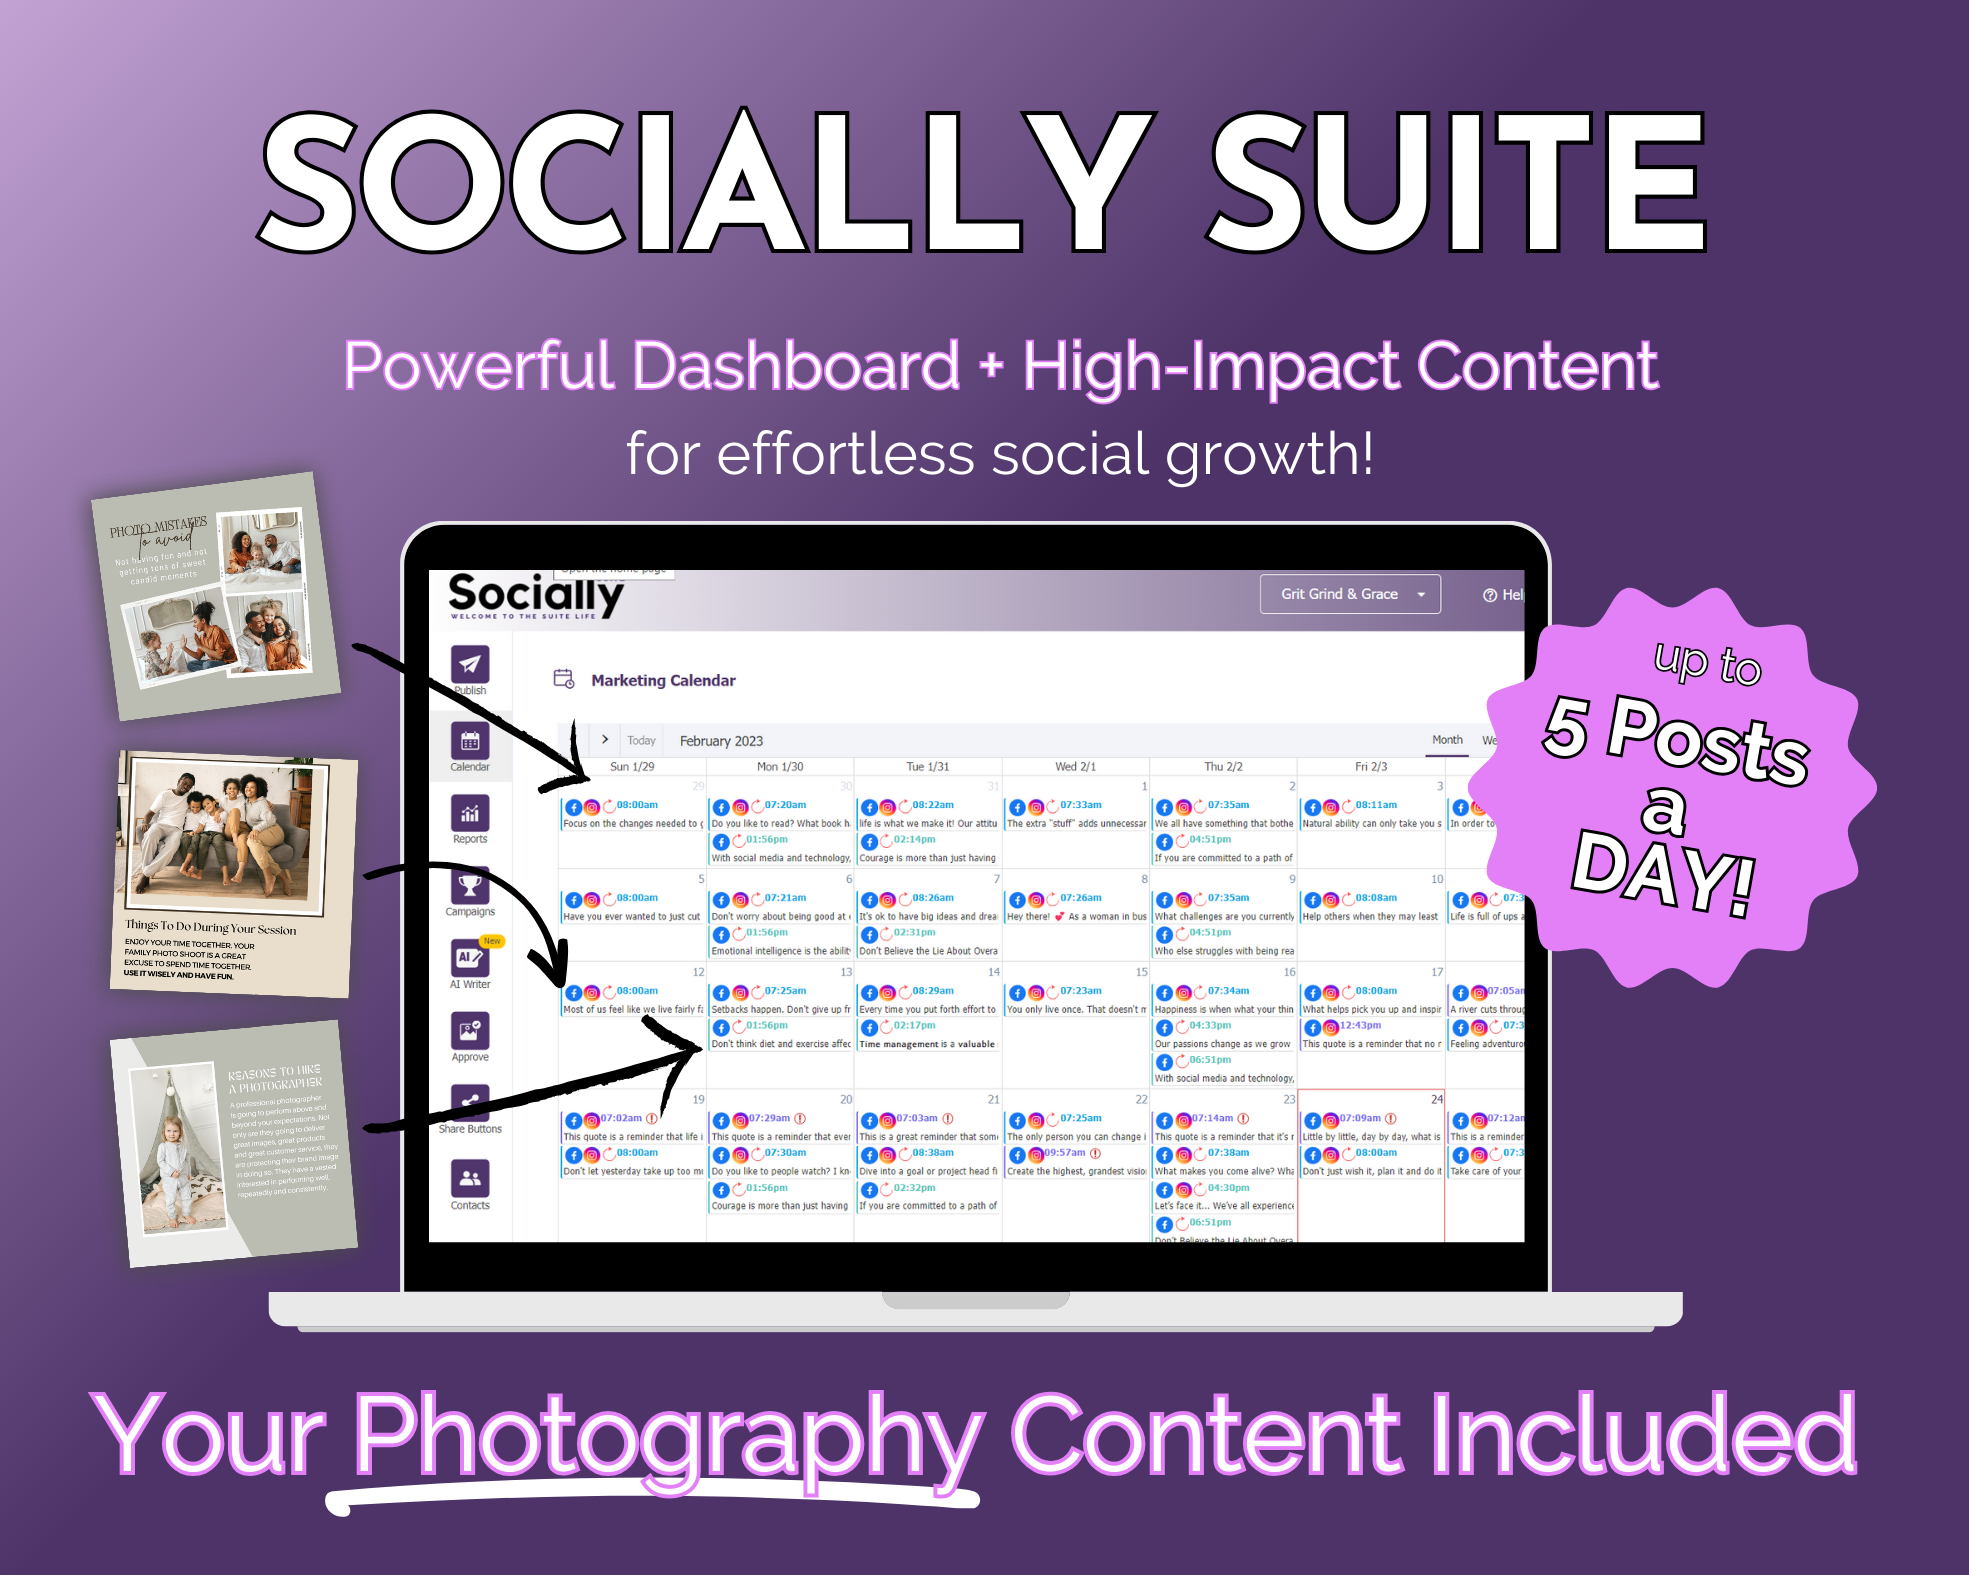 A promotional graphic for "Get Socially Inclined's Socially Suite Membership," advertising an online presence and social media marketing content dashboard that allows for up to 5 posts a day, with photography content included.